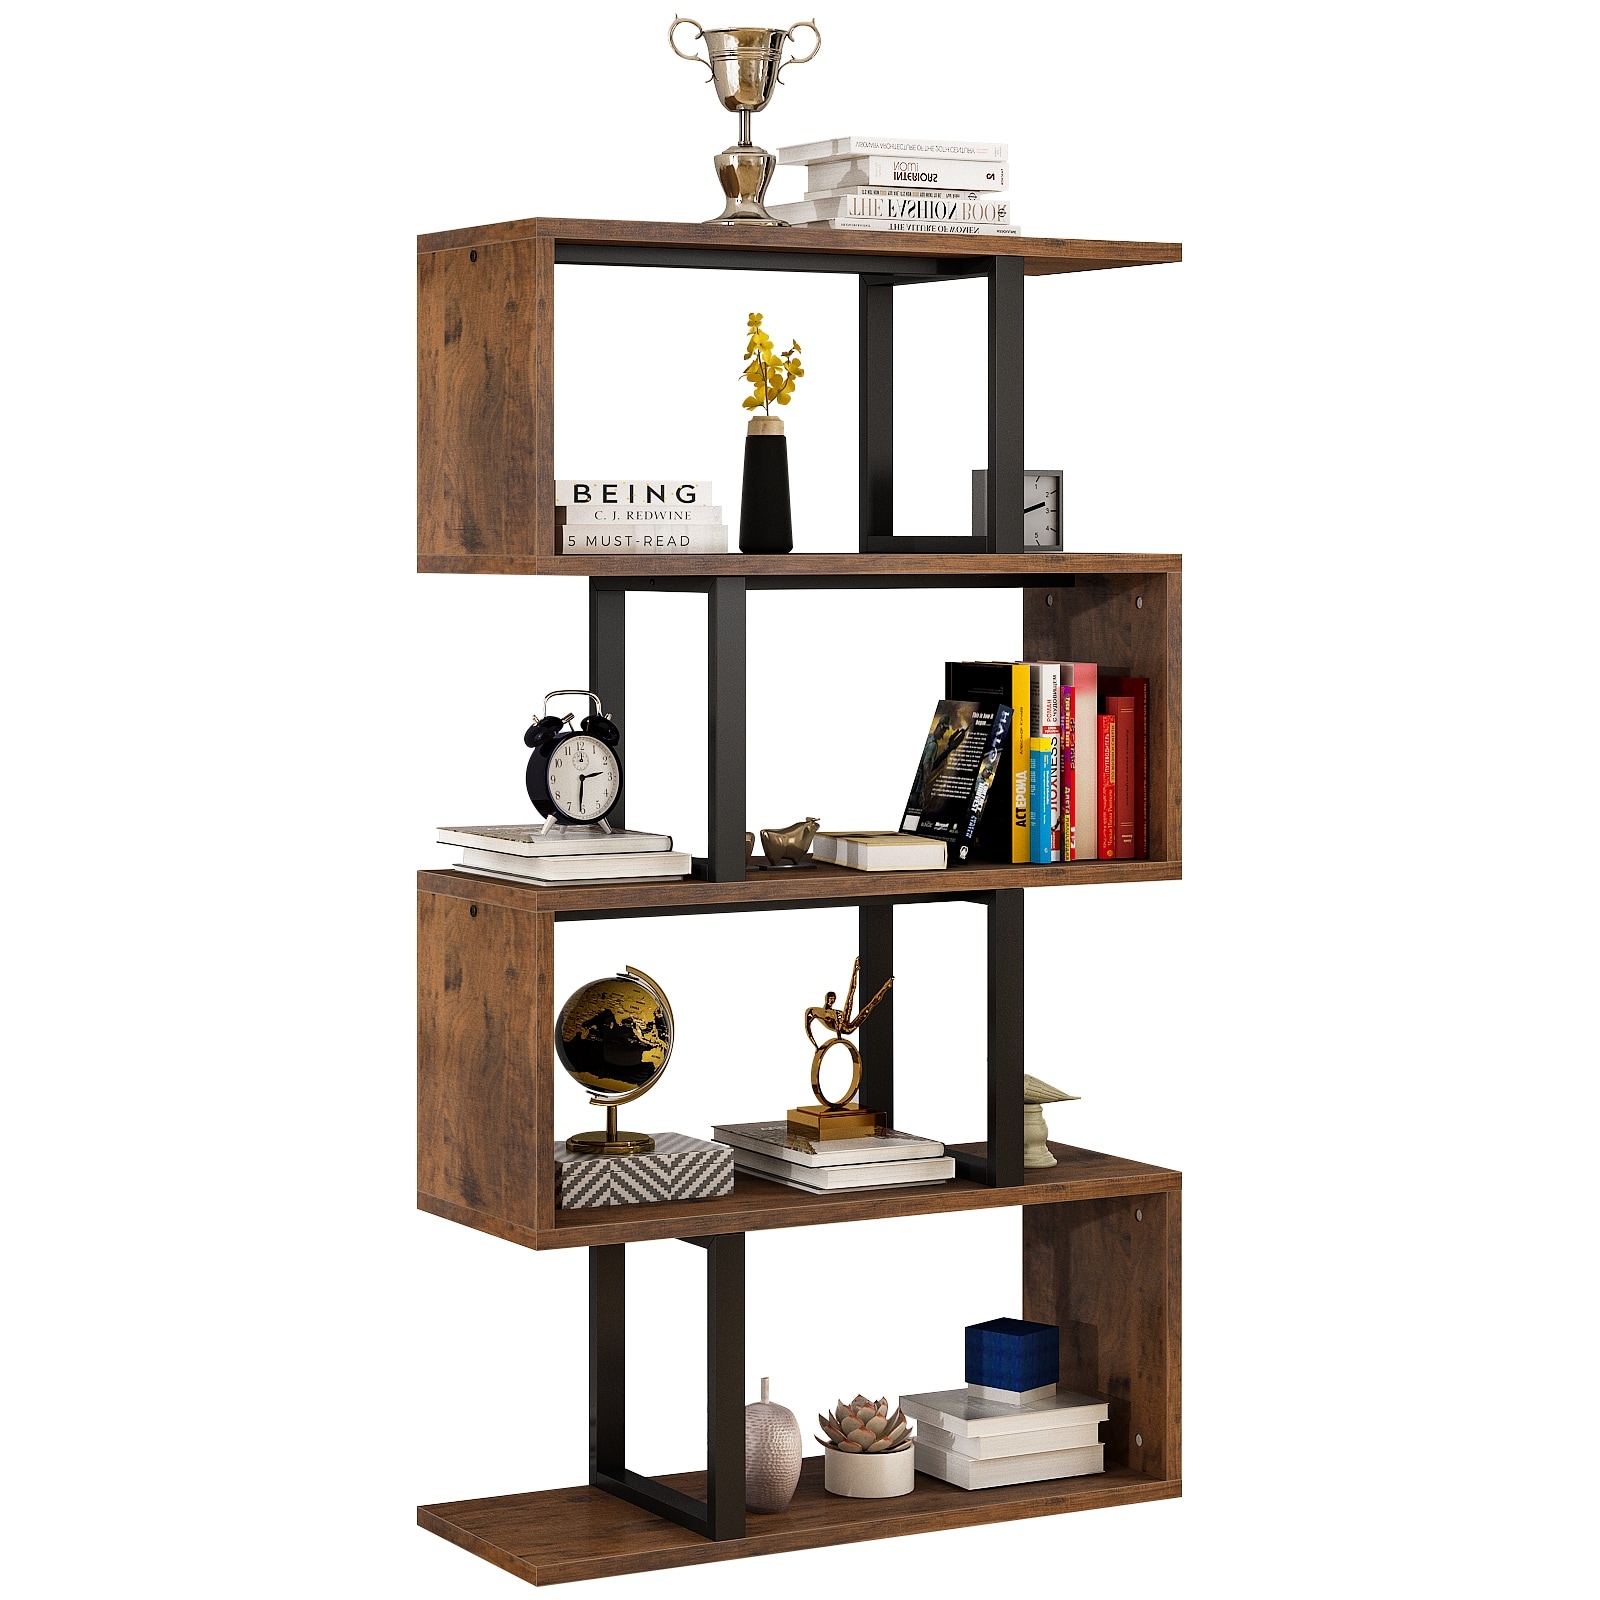 https://ak1.ostkcdn.com/images/products/is/images/direct/cdde1134d8a68124fabd4af2ac0eded62dda3ca7/Hermoth-5-Tiers-Bookshelf-S-Shaped-Z-Shelf-Style-Bookcase-Storage-Display.jpg